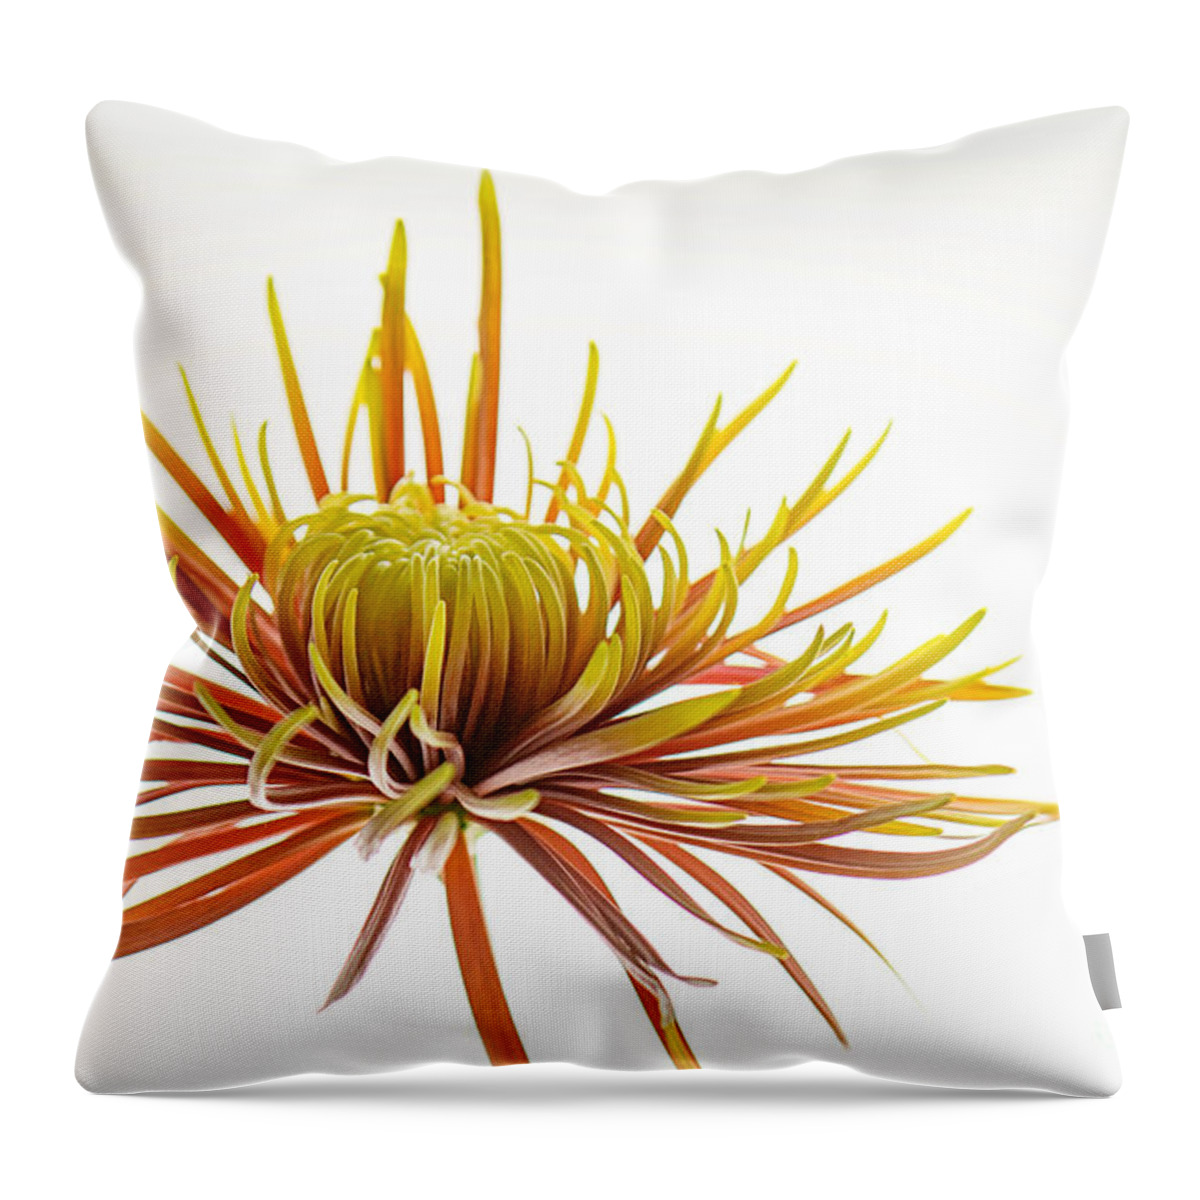 Yellow Throw Pillow featuring the photograph Yellow Dahlia by Rebecca Cozart